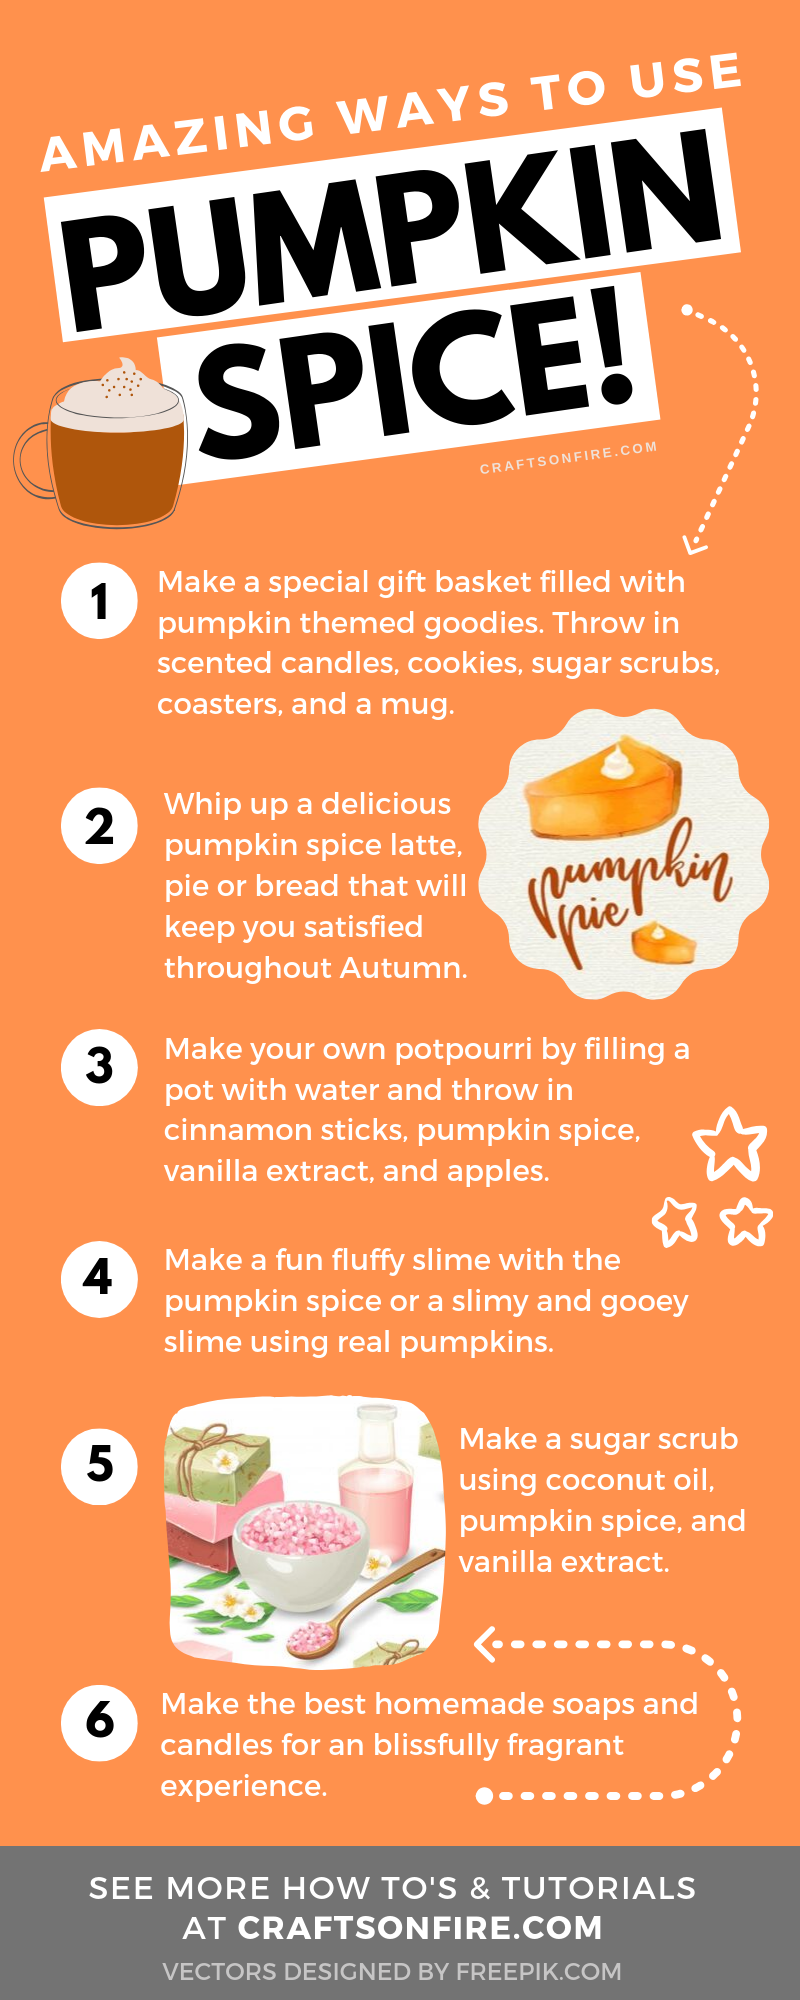 Reading for the Fall? Then you'll be excited to try these awesome Pumpkin Spice Crafts. Here's brilliant ways to use pumpkin spice this Autumn! LOVE THIS. #fallcrafts #autumncrafts #diy #pumpkinspice